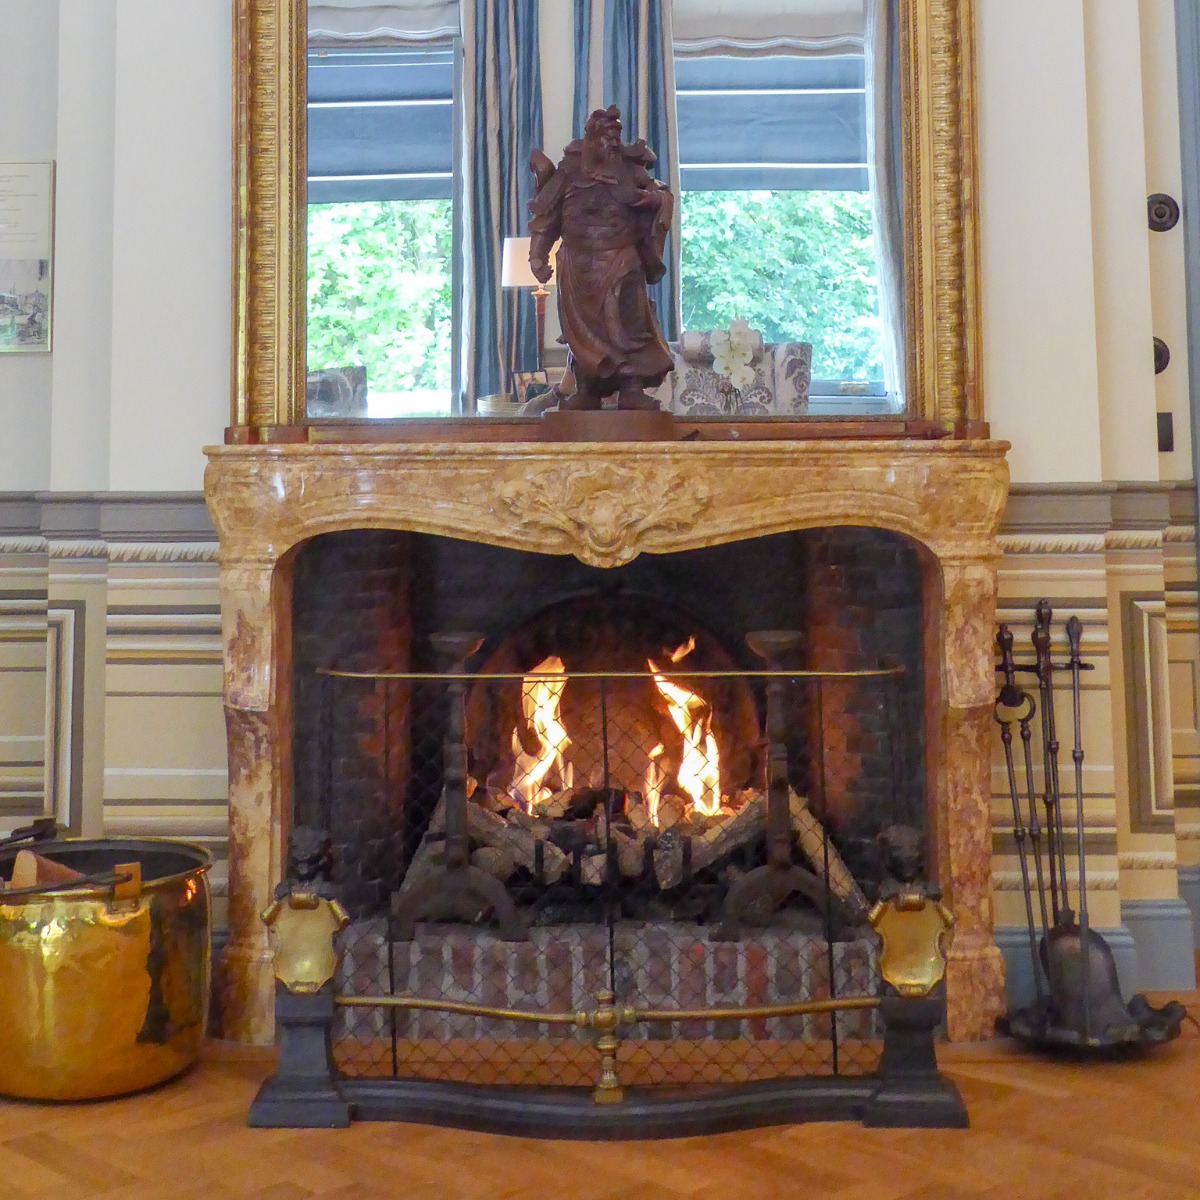 Gas fireplace decorated as wood-burning fireplace with antique andirons